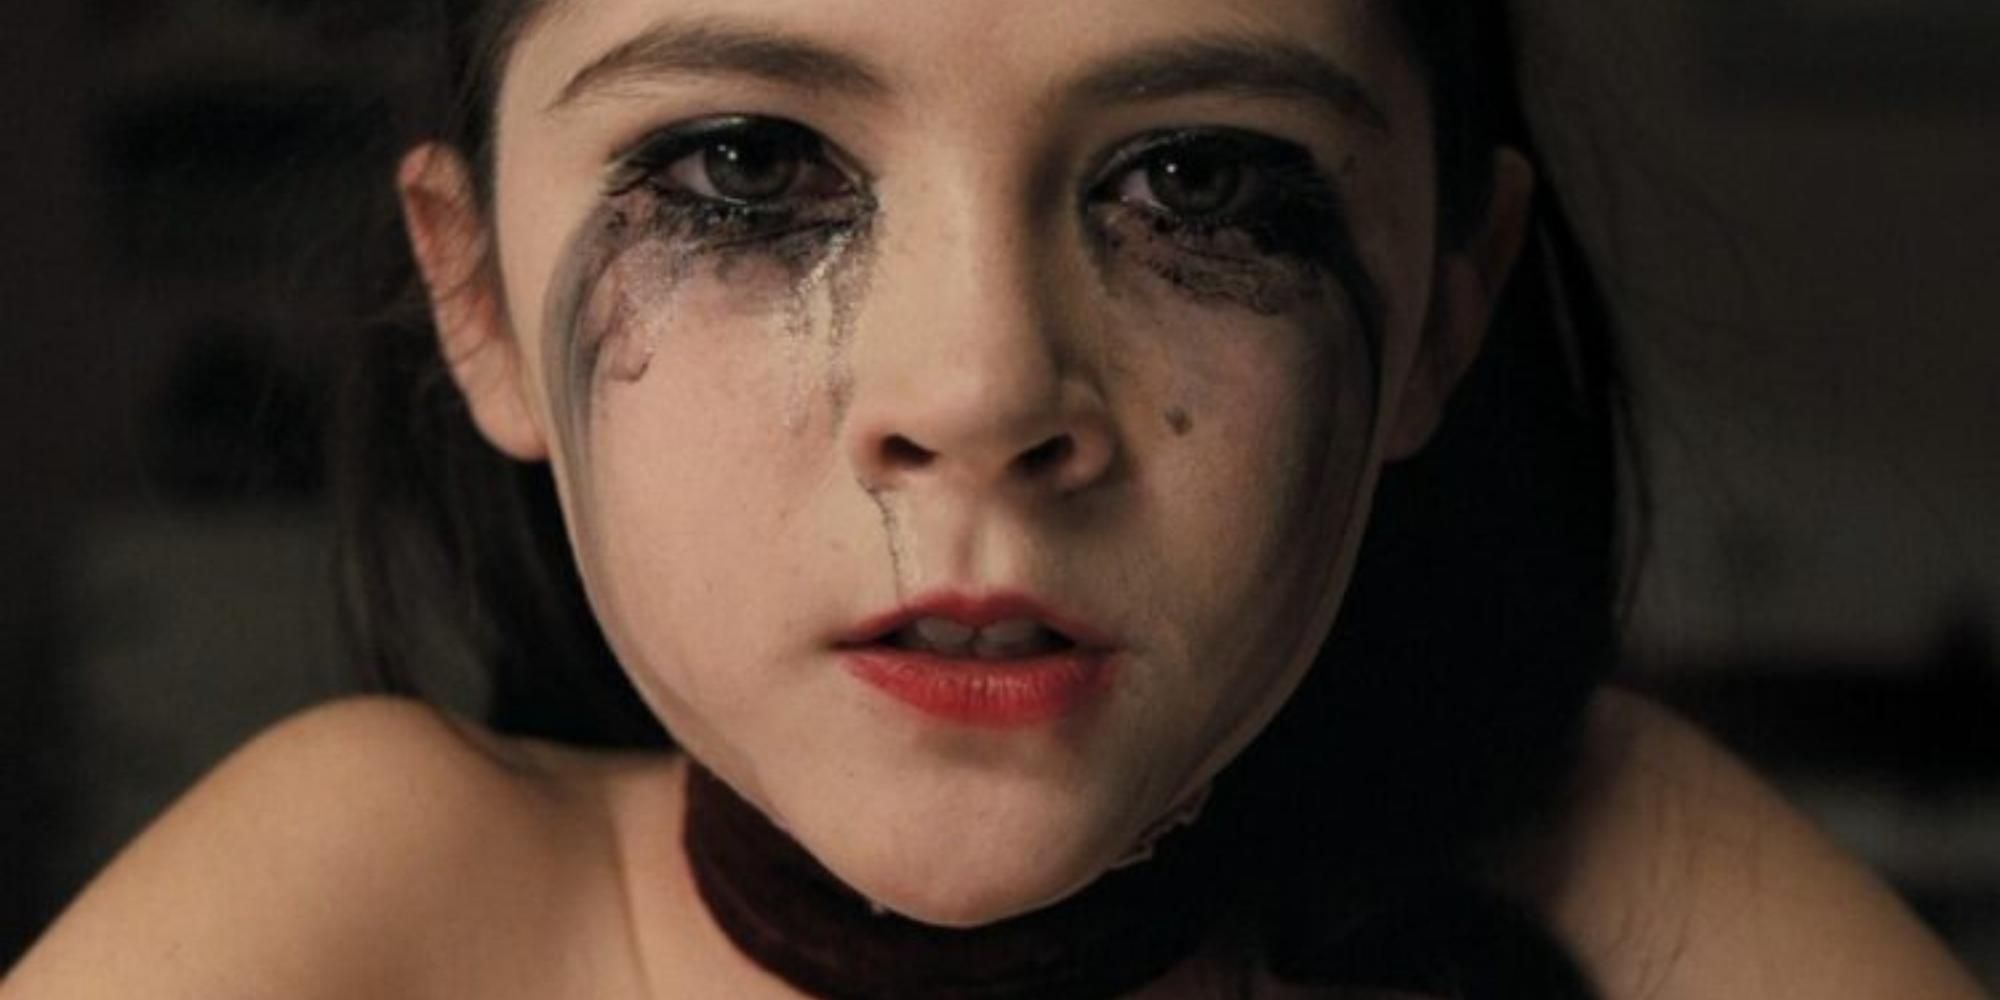 Esther crying in Orphan